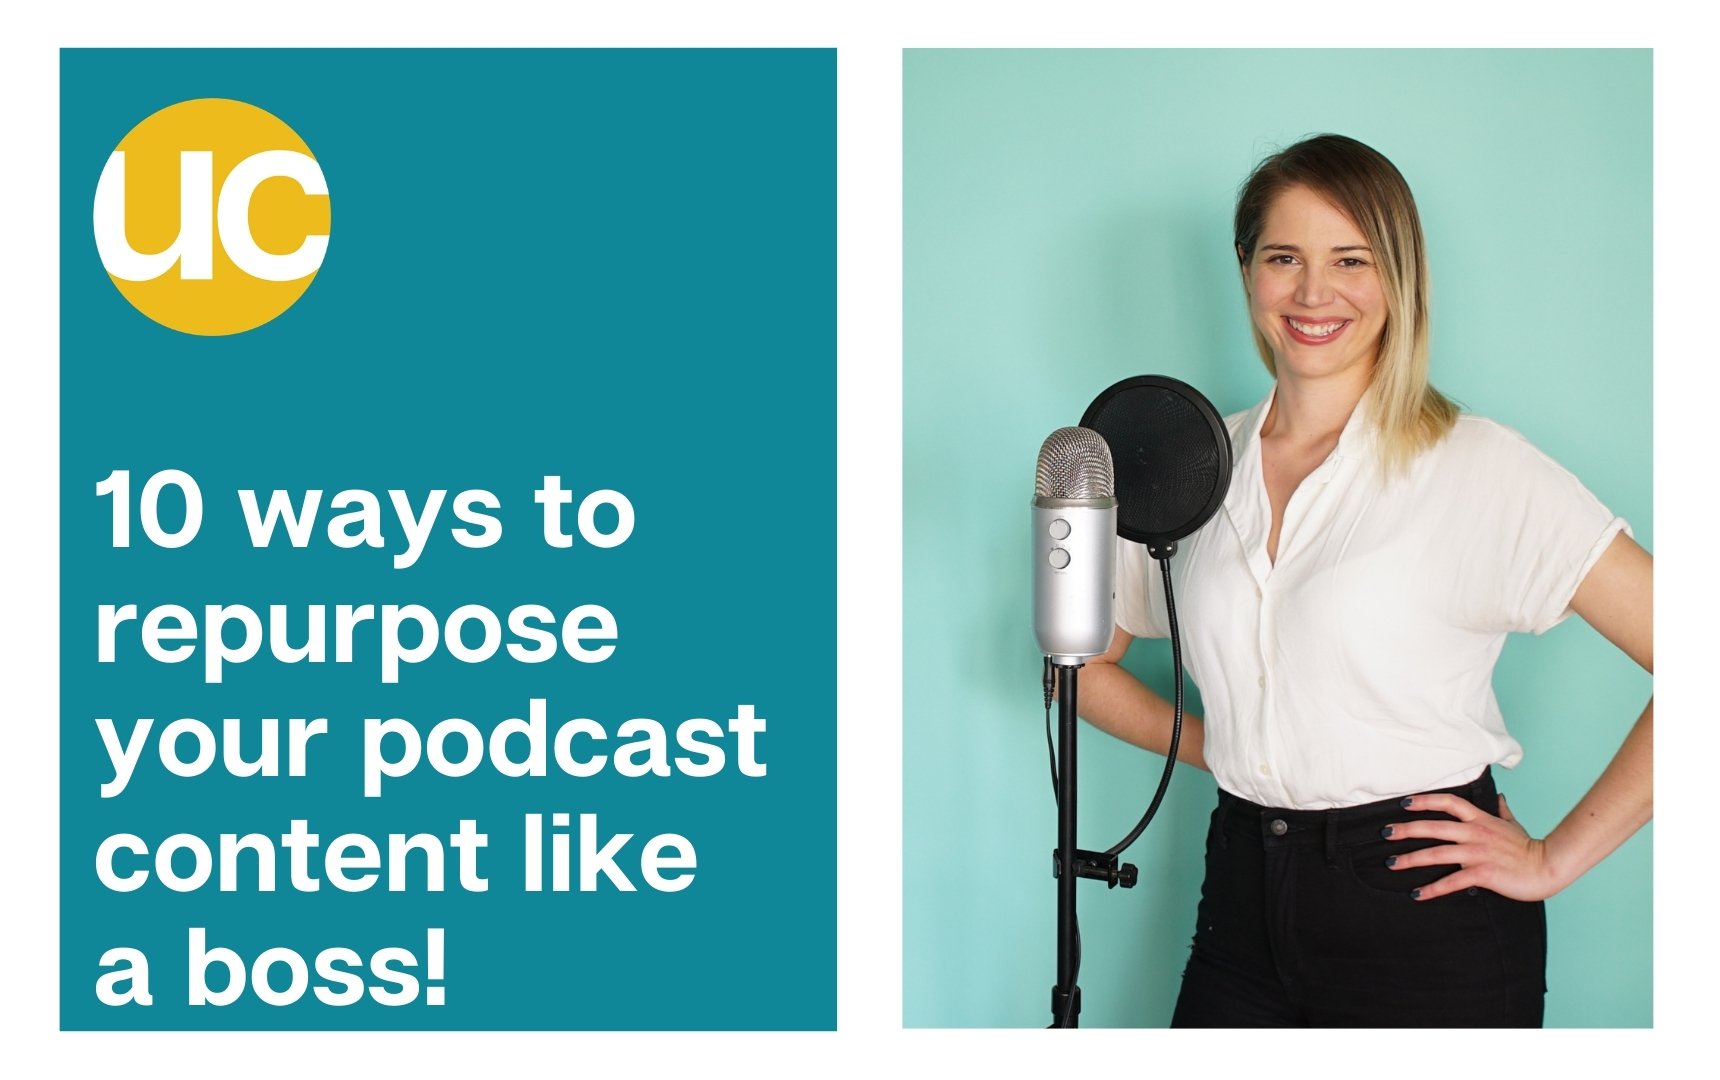 10 ways to repurpose your podcast content like a boss!